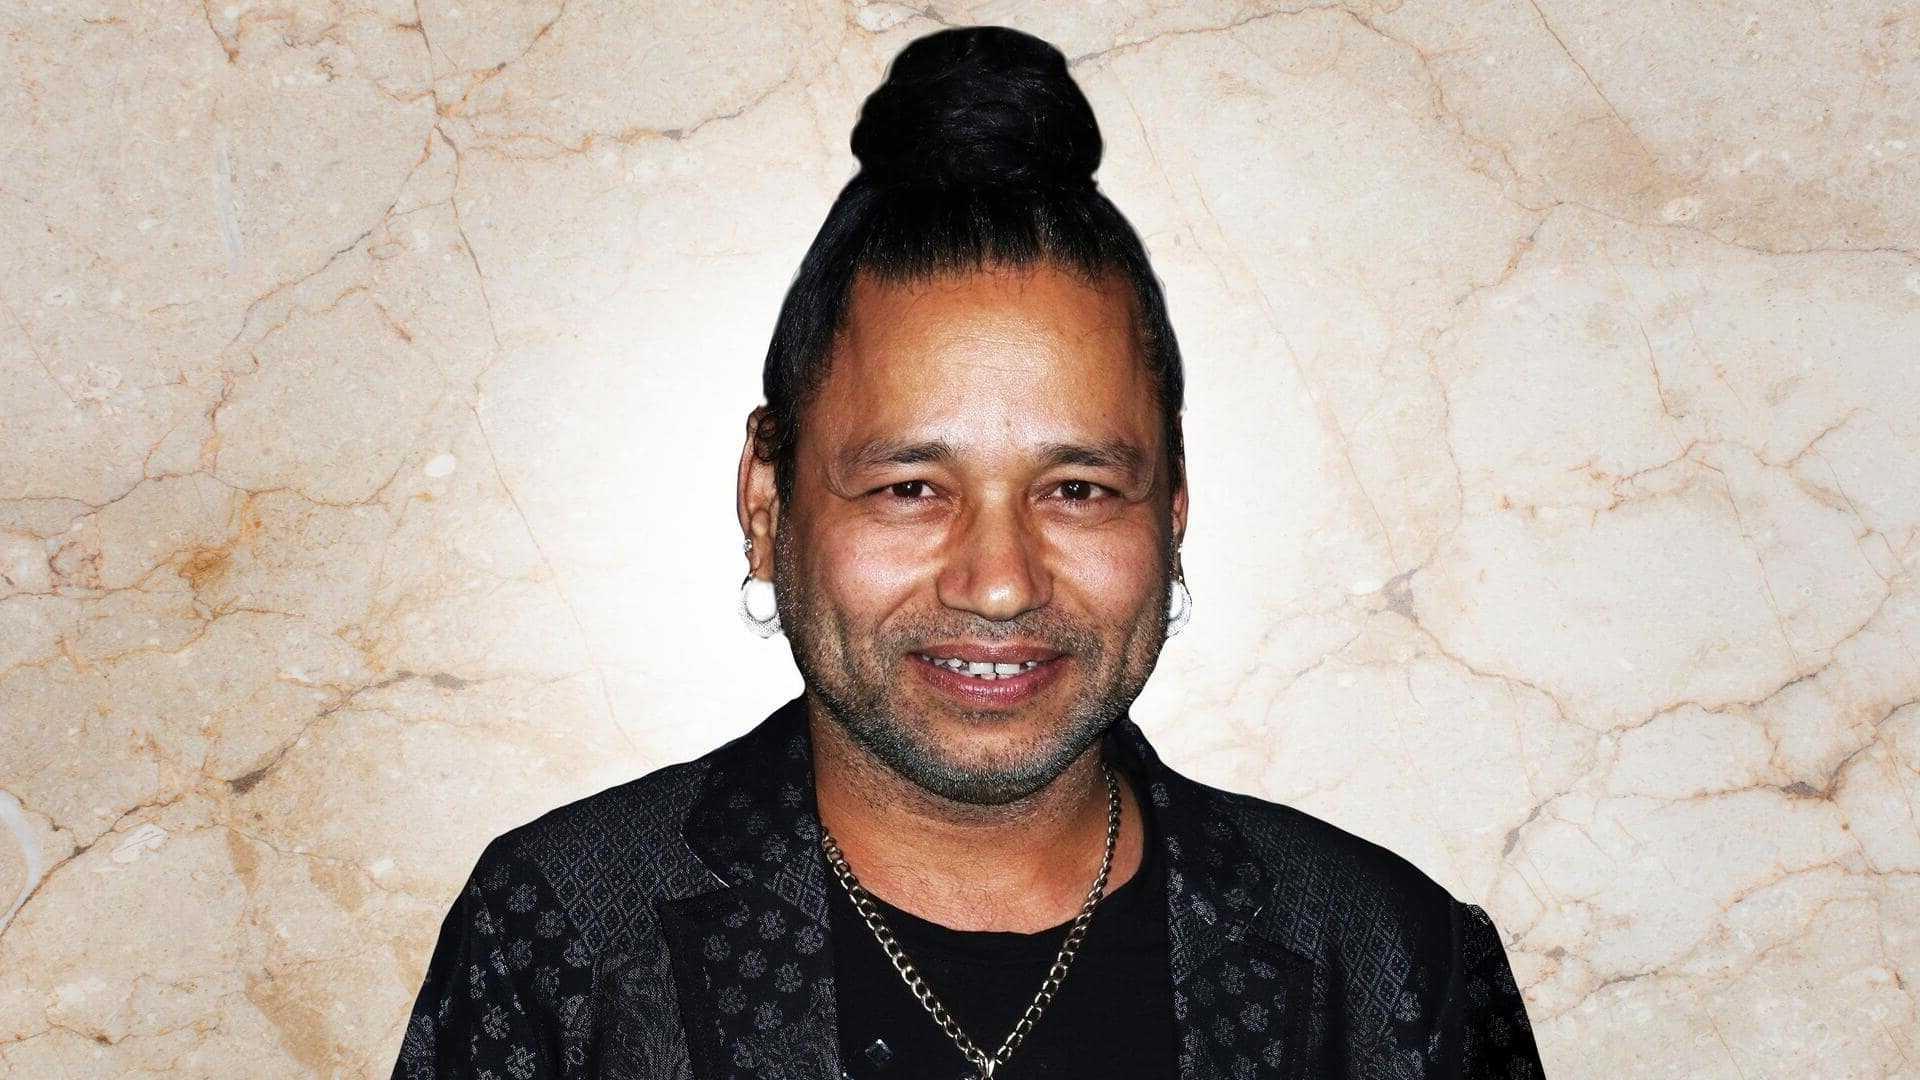 Kailash Kher - Biography, Height, Career, Age, Networth, Wife